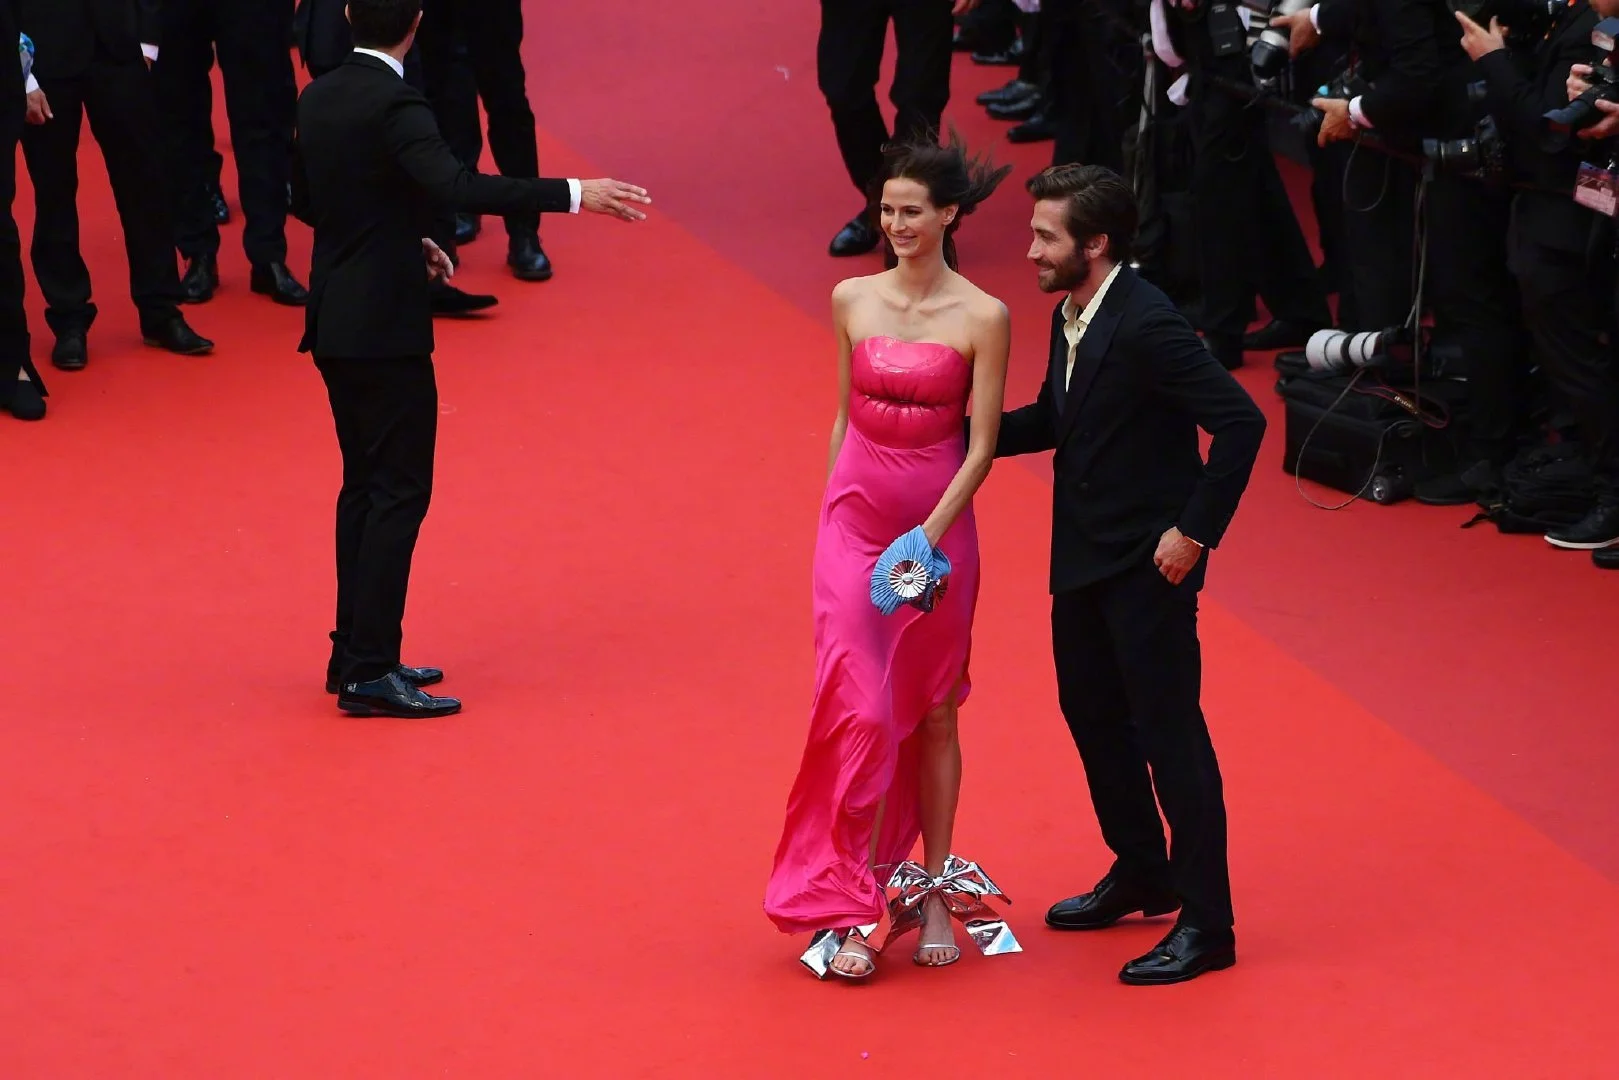 Jake Gyllenhaal and girlfriend Jeanne Cadieu on the red carpet for the 75th anniversary of the Cannes Film Festival